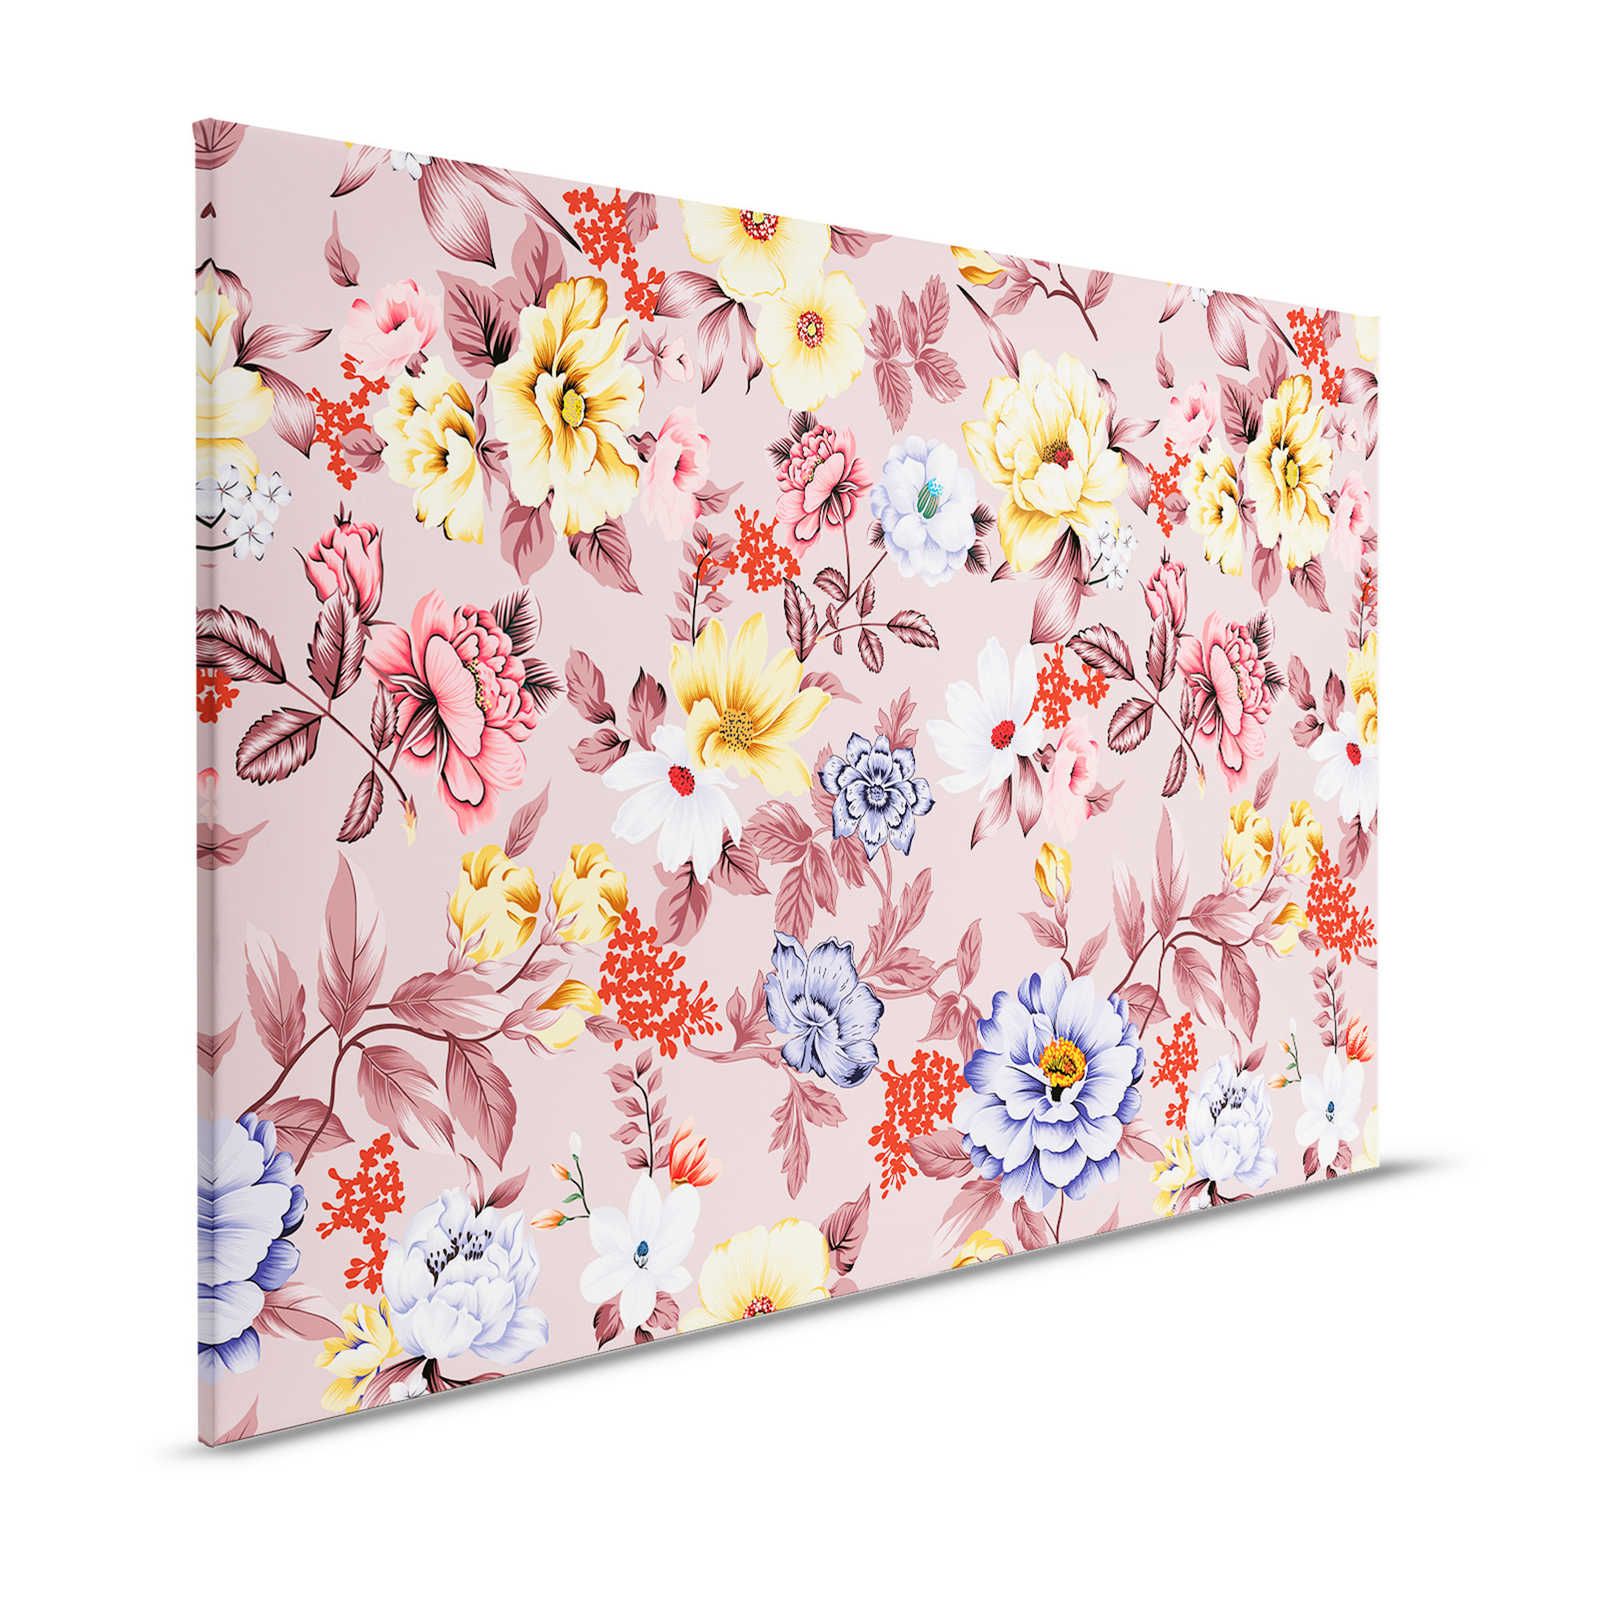 Canvas floral with flowers and leaves - 120 cm x 80 cm
